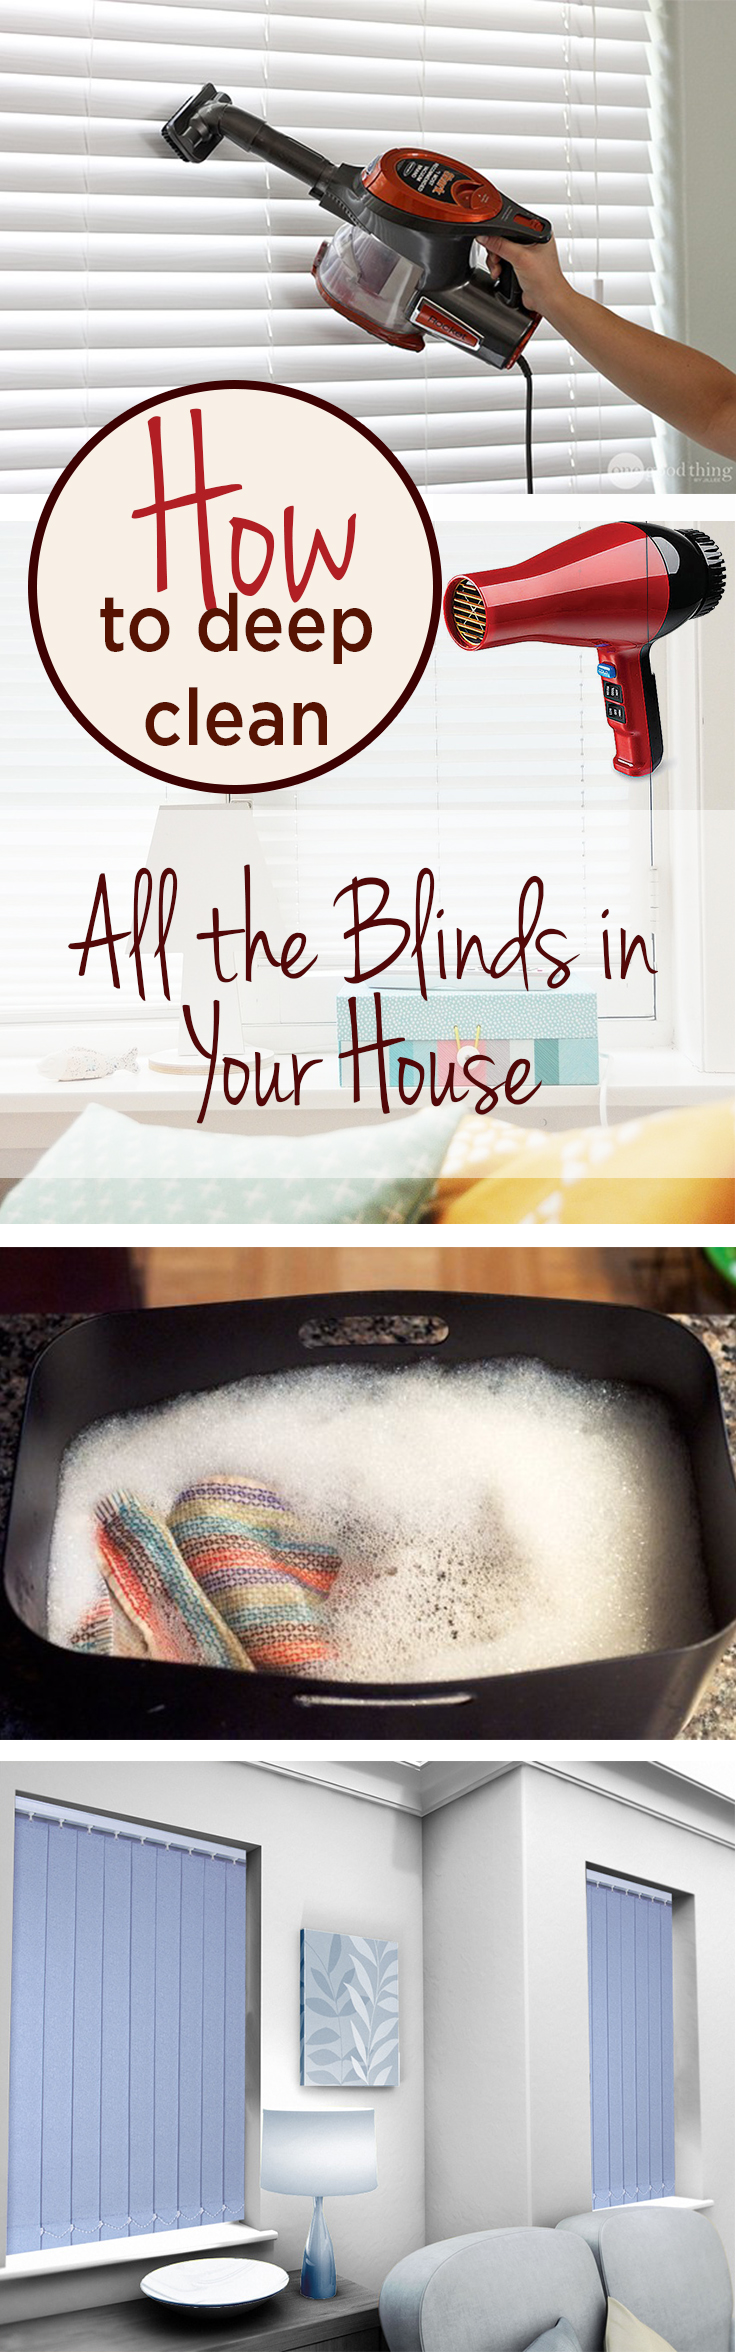 Deep clean, how to clean your blinds, clean your blinds, popular pin, bling cleaning tips, clean your blinds, cleaning hacks, cleaning tips, clean home.